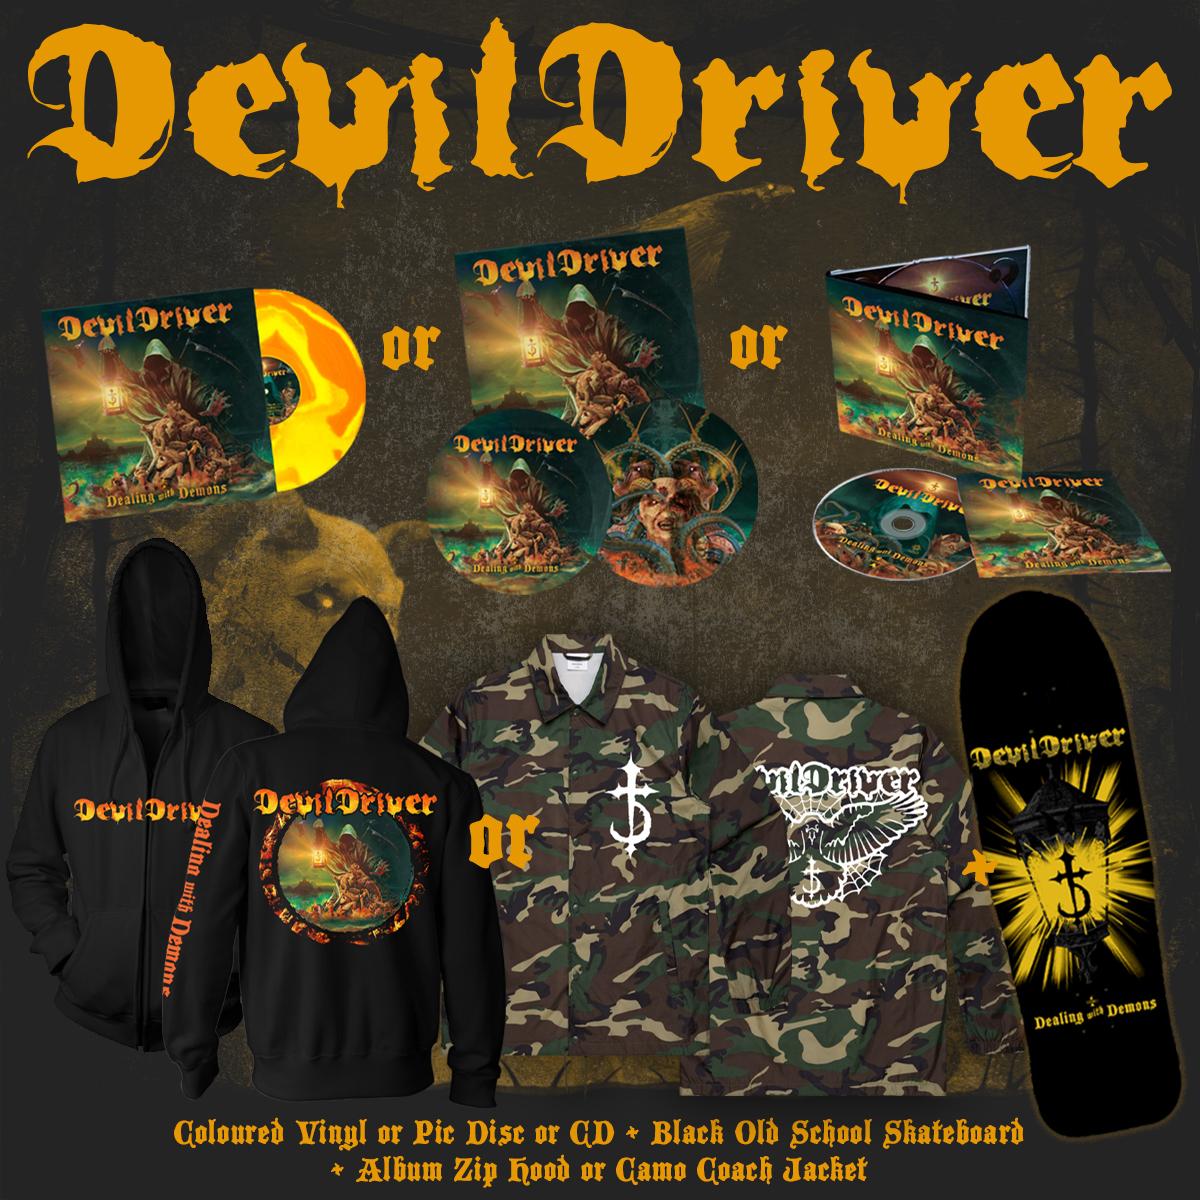 DEVILDRIVER Reveals Surreal Music Video for Anthemic New Single "Wishing"